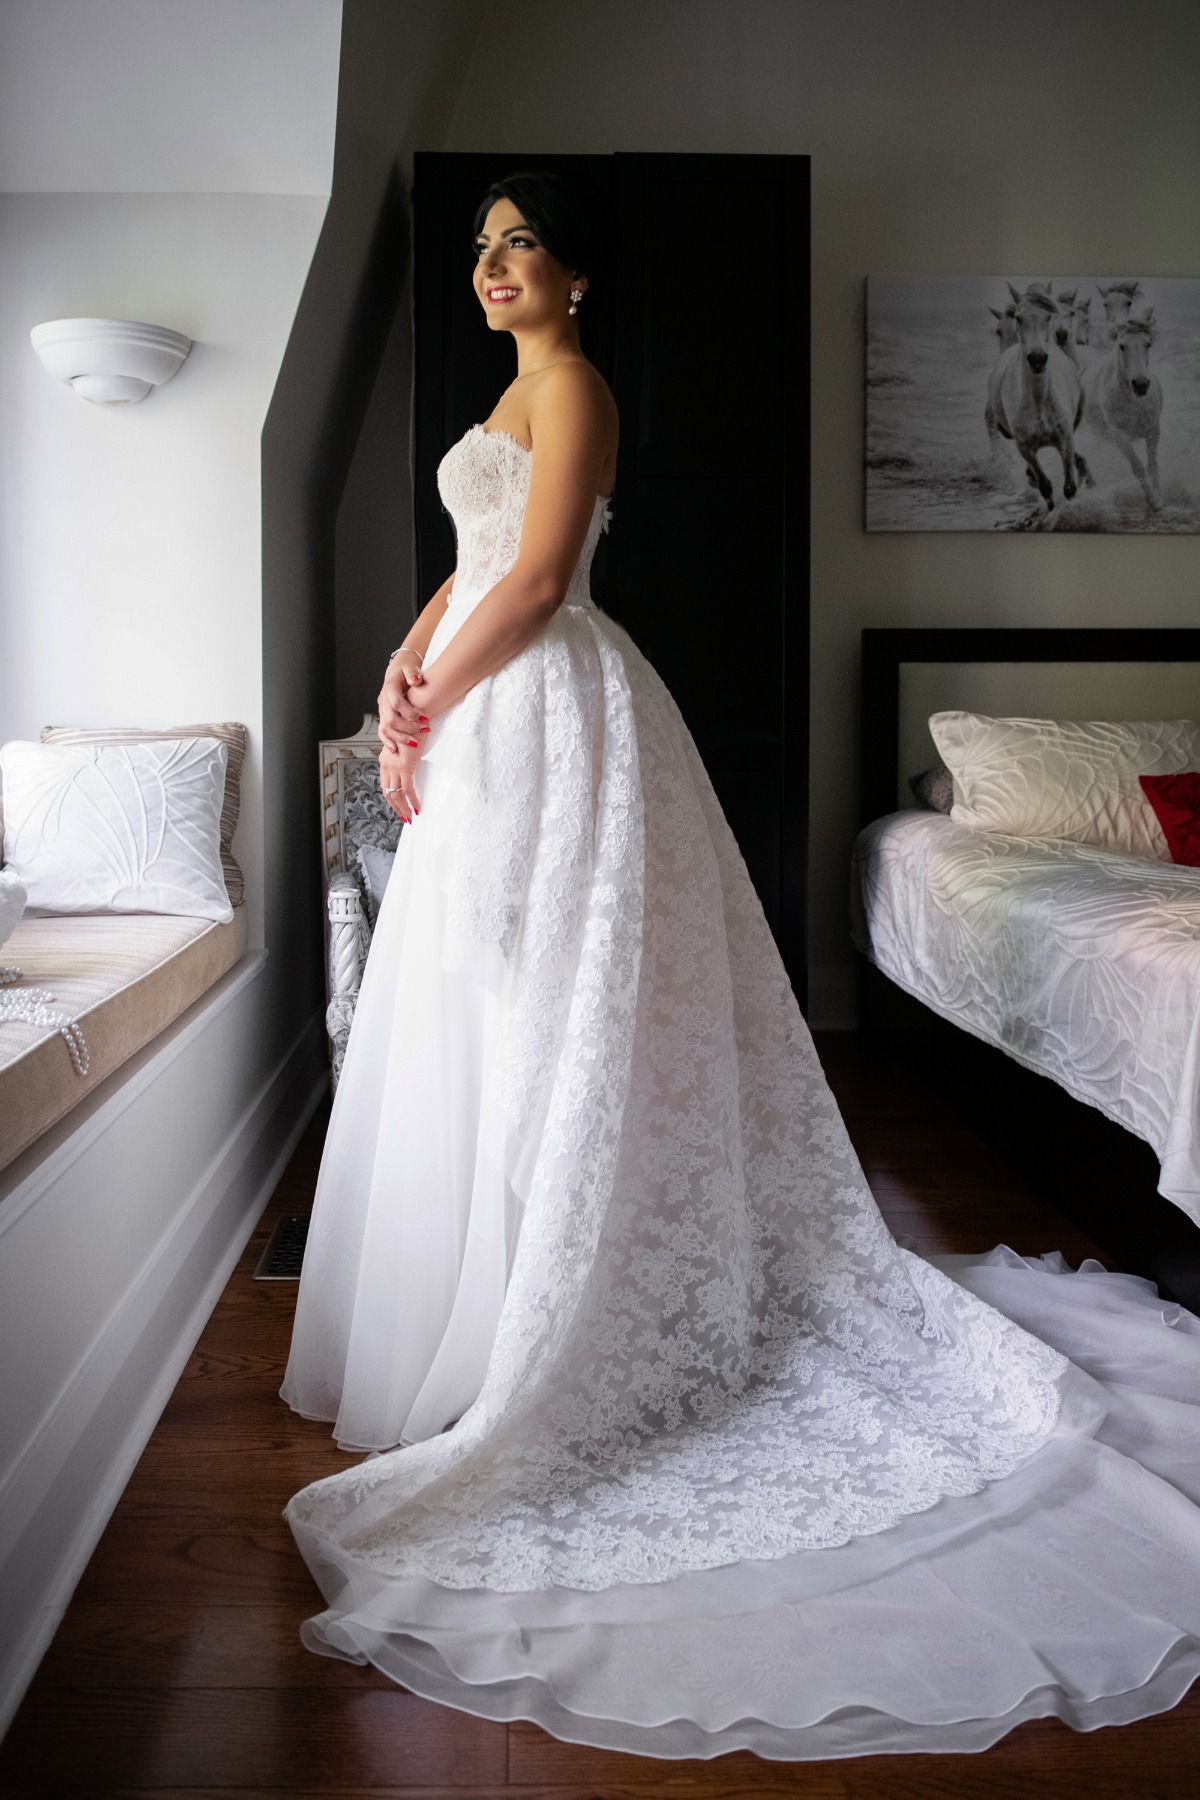 21-happy-bride-by-the-window-picture